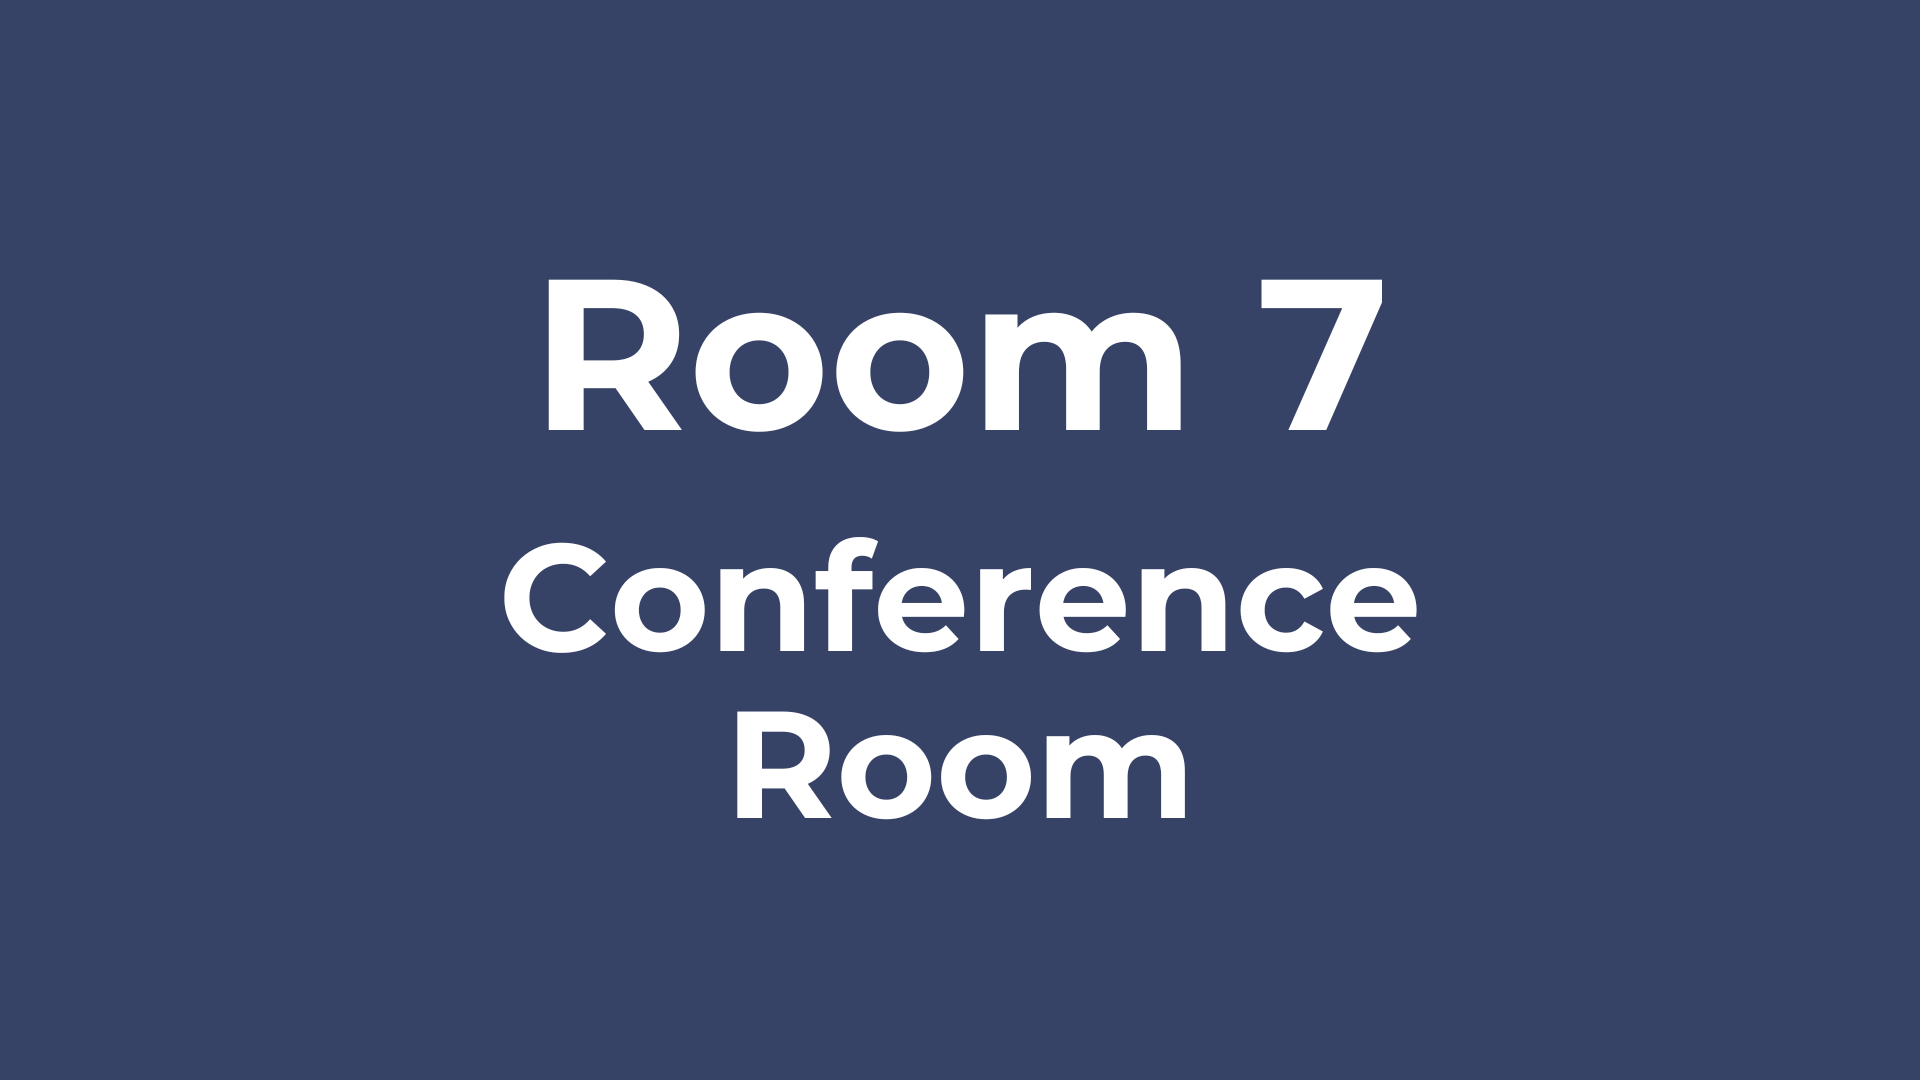 Room 7 - Conference Room